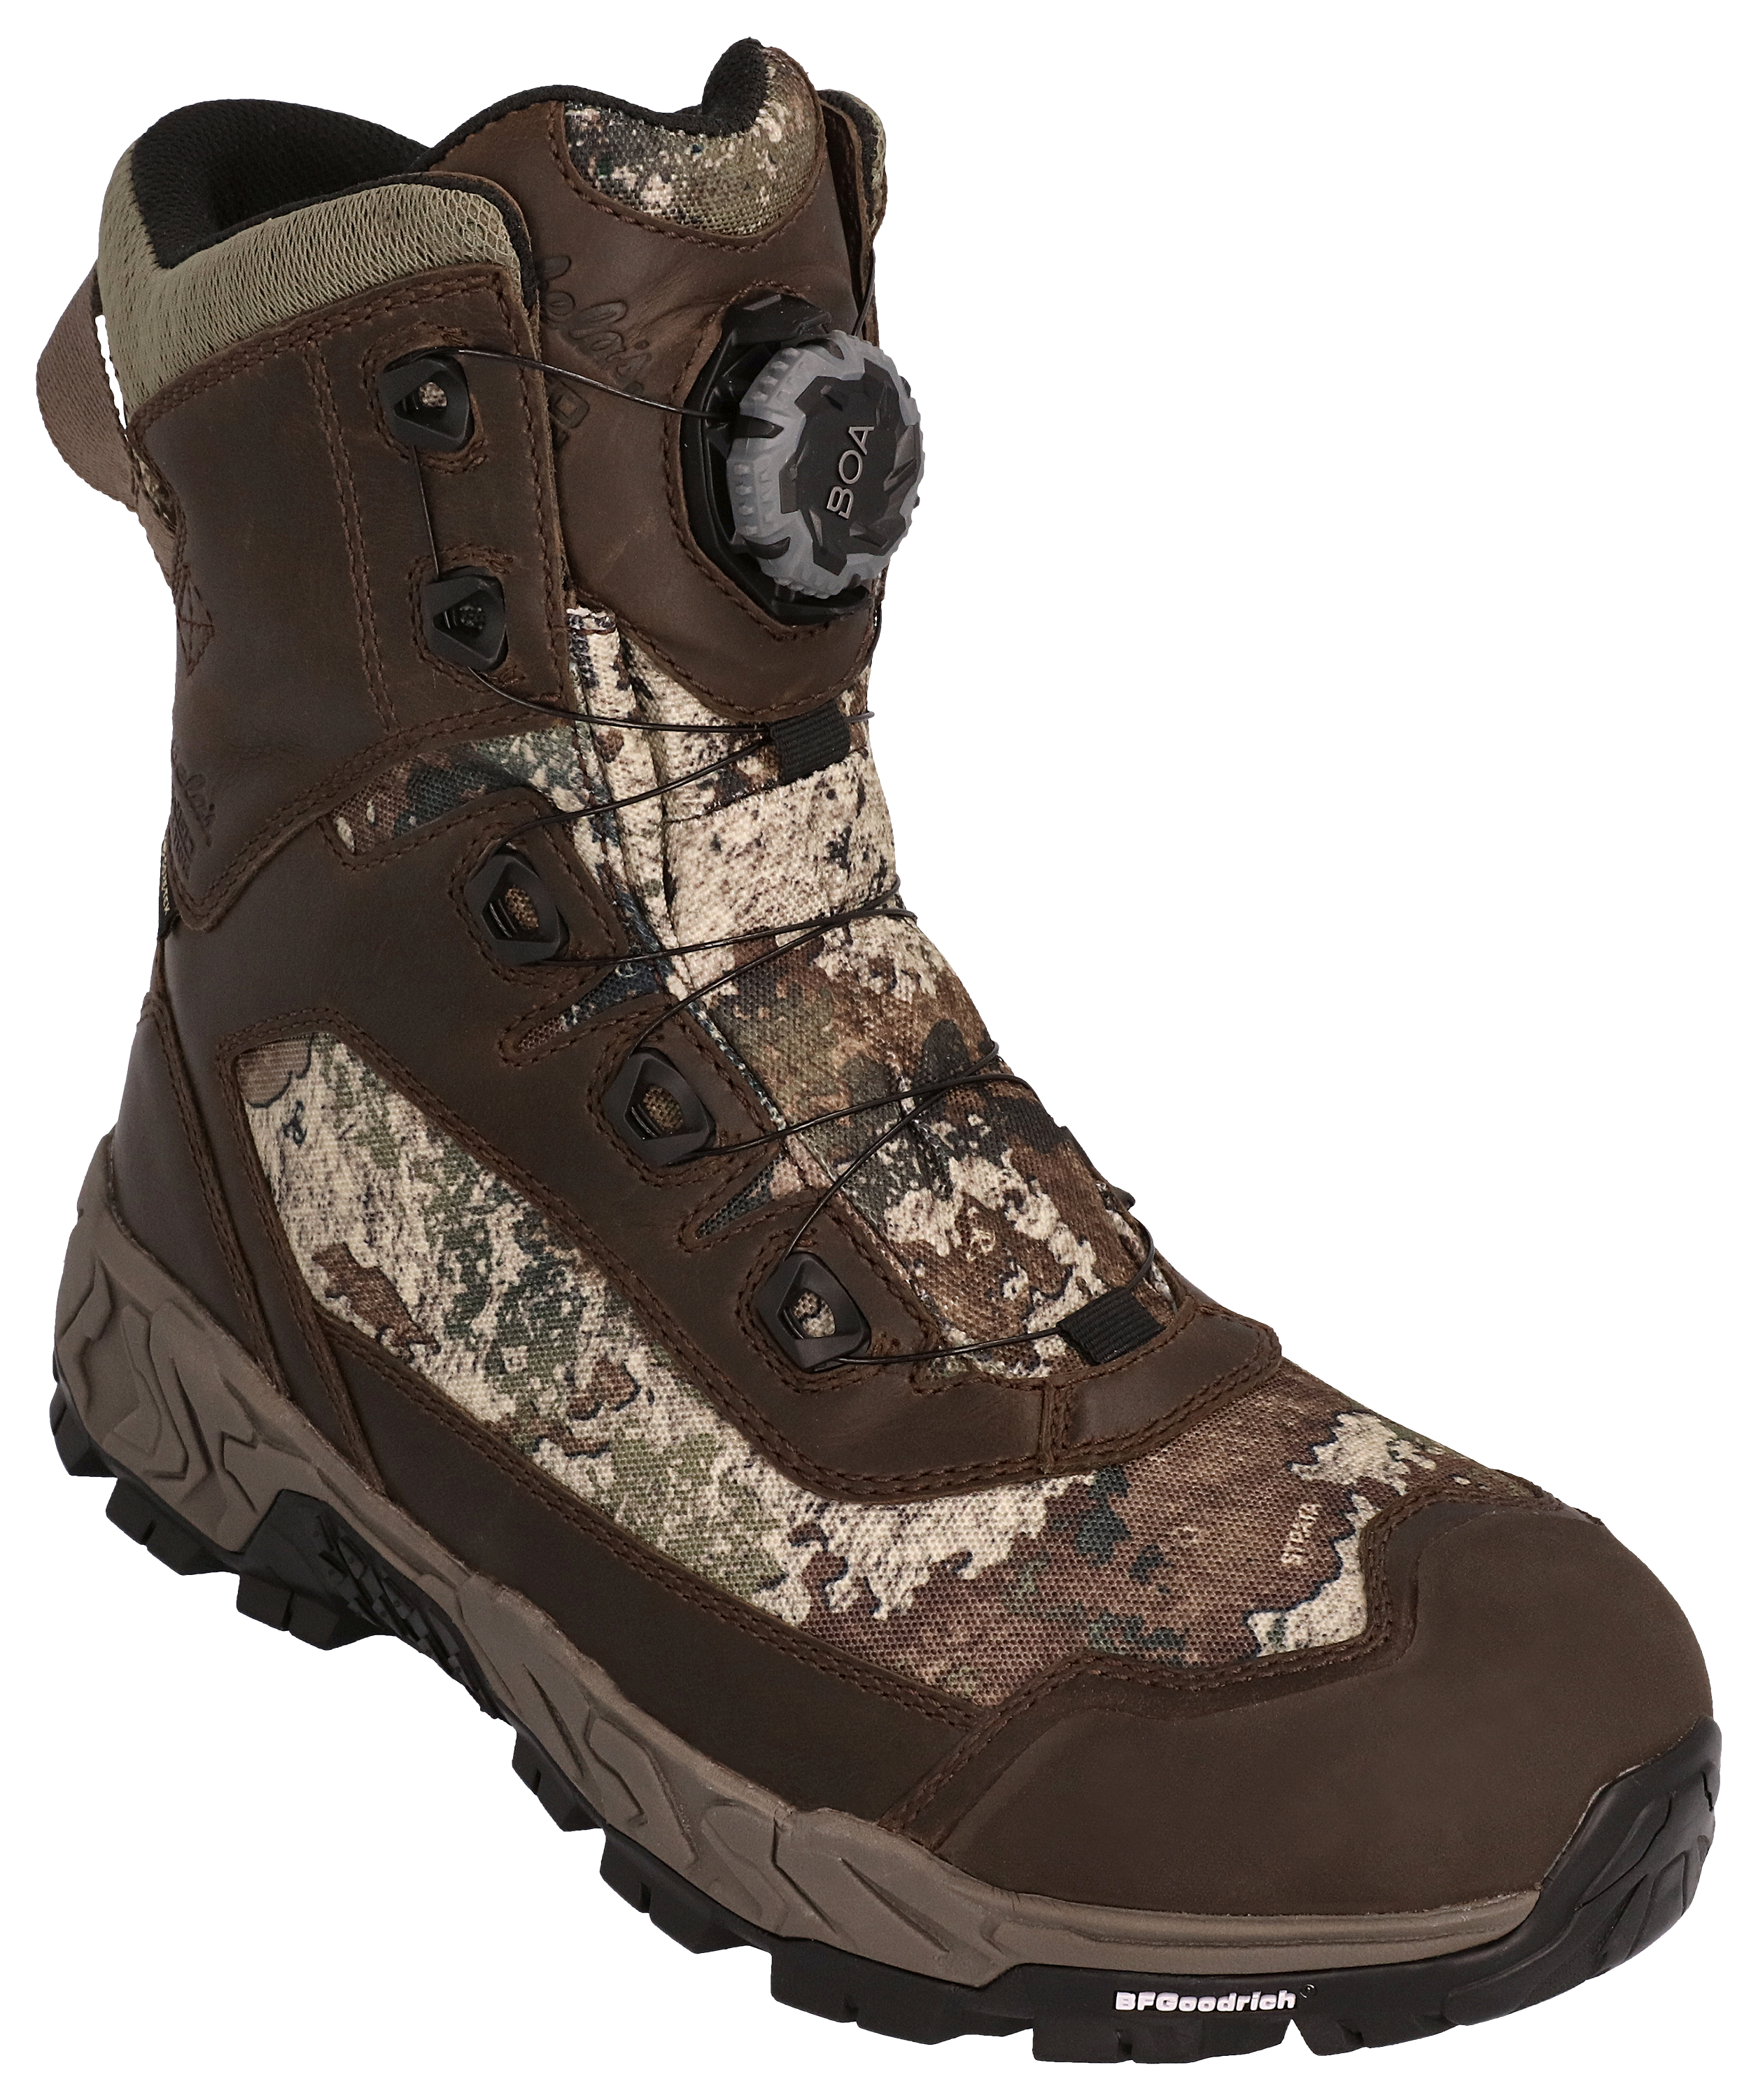 Cabela's Treadfast 2.0 BOA GORE-TEX Insulated Hunting Boots for Men